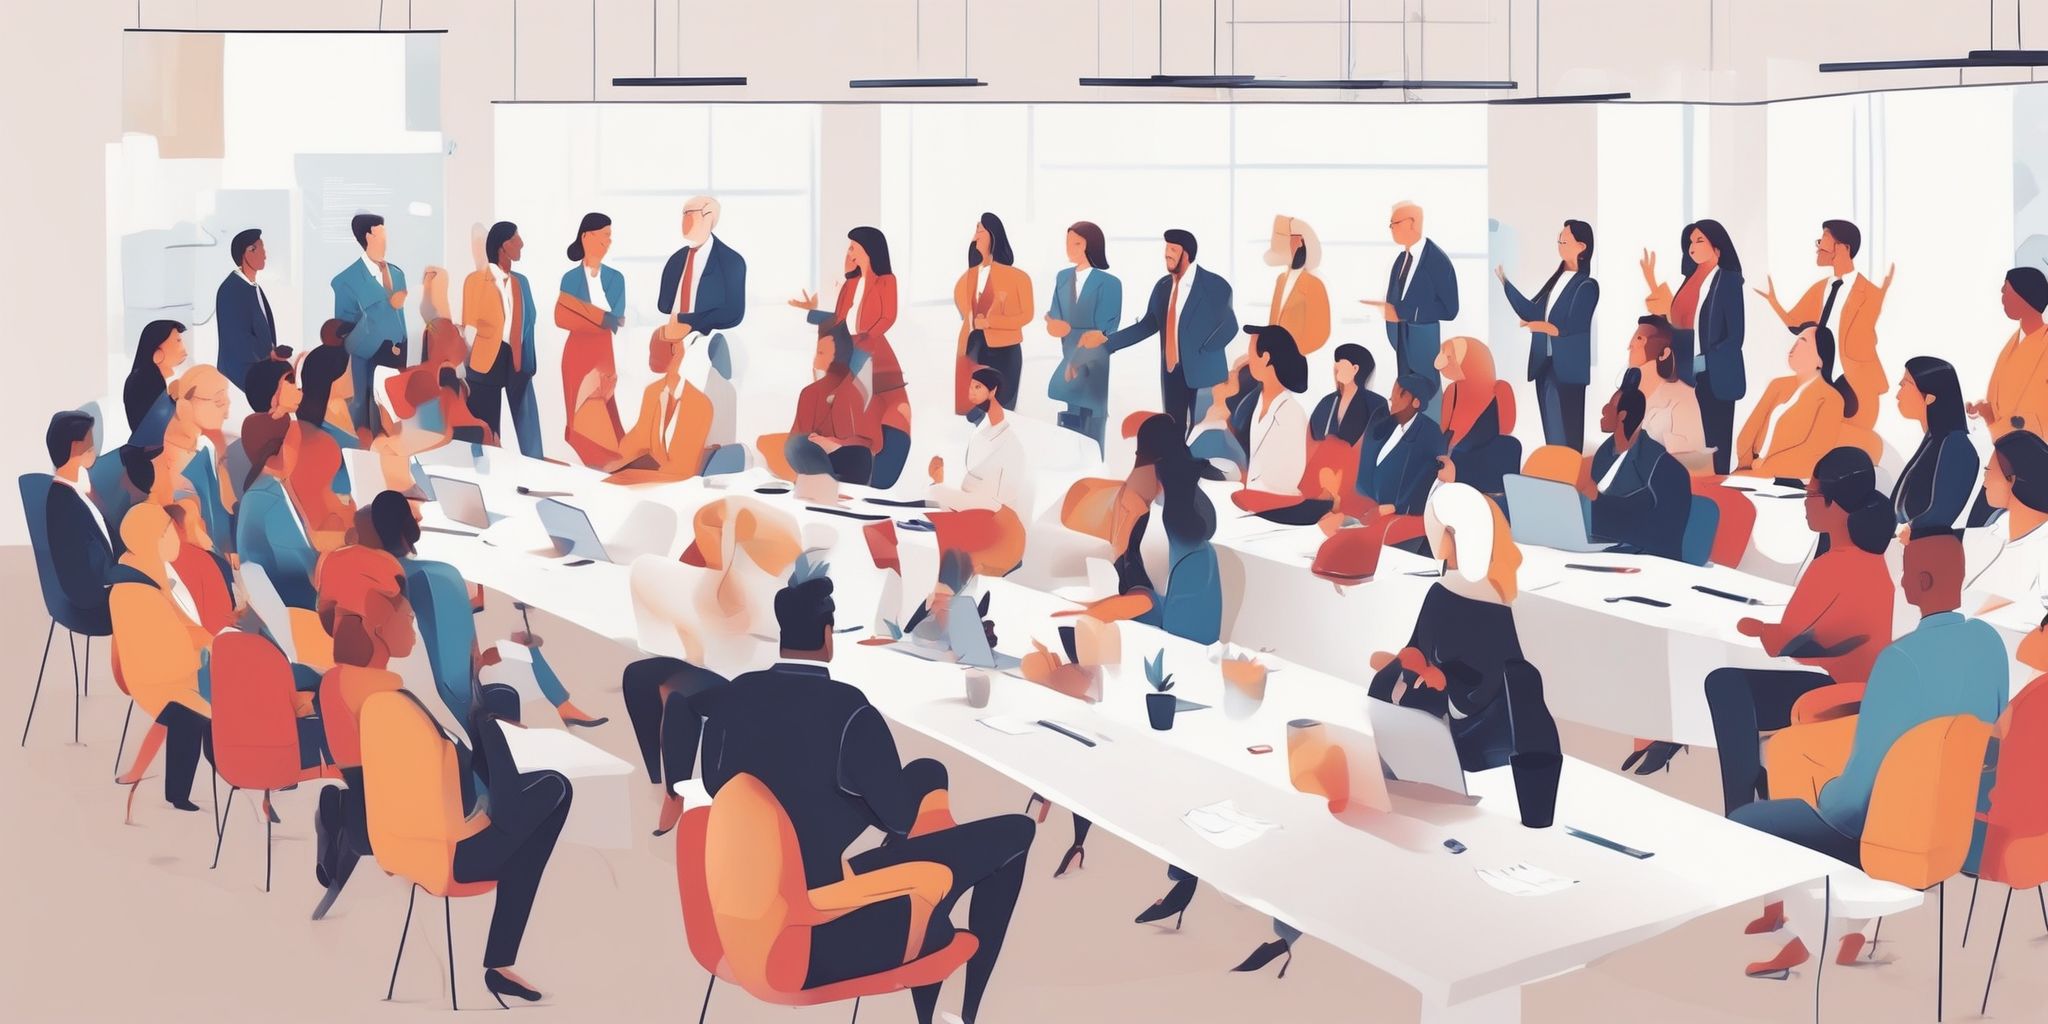 conference in illustration style with gradients and white background